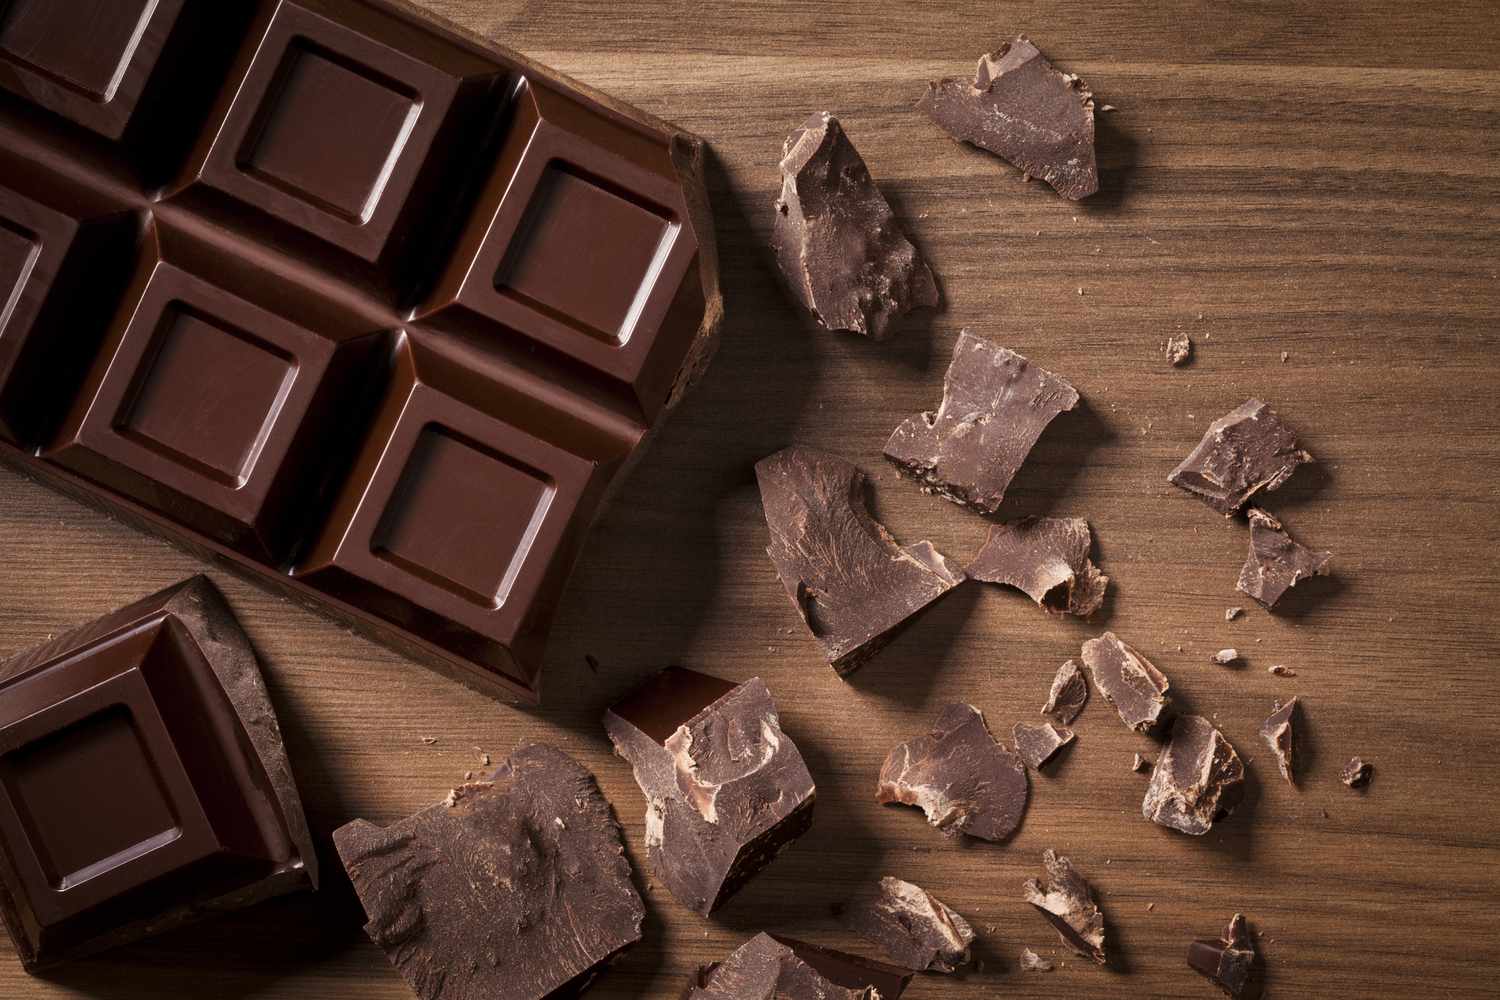 Dark Chocolate Market Is Estimated To Witness High Growth Owing To Health Benefits And Growing Demand For Premium Chocolates